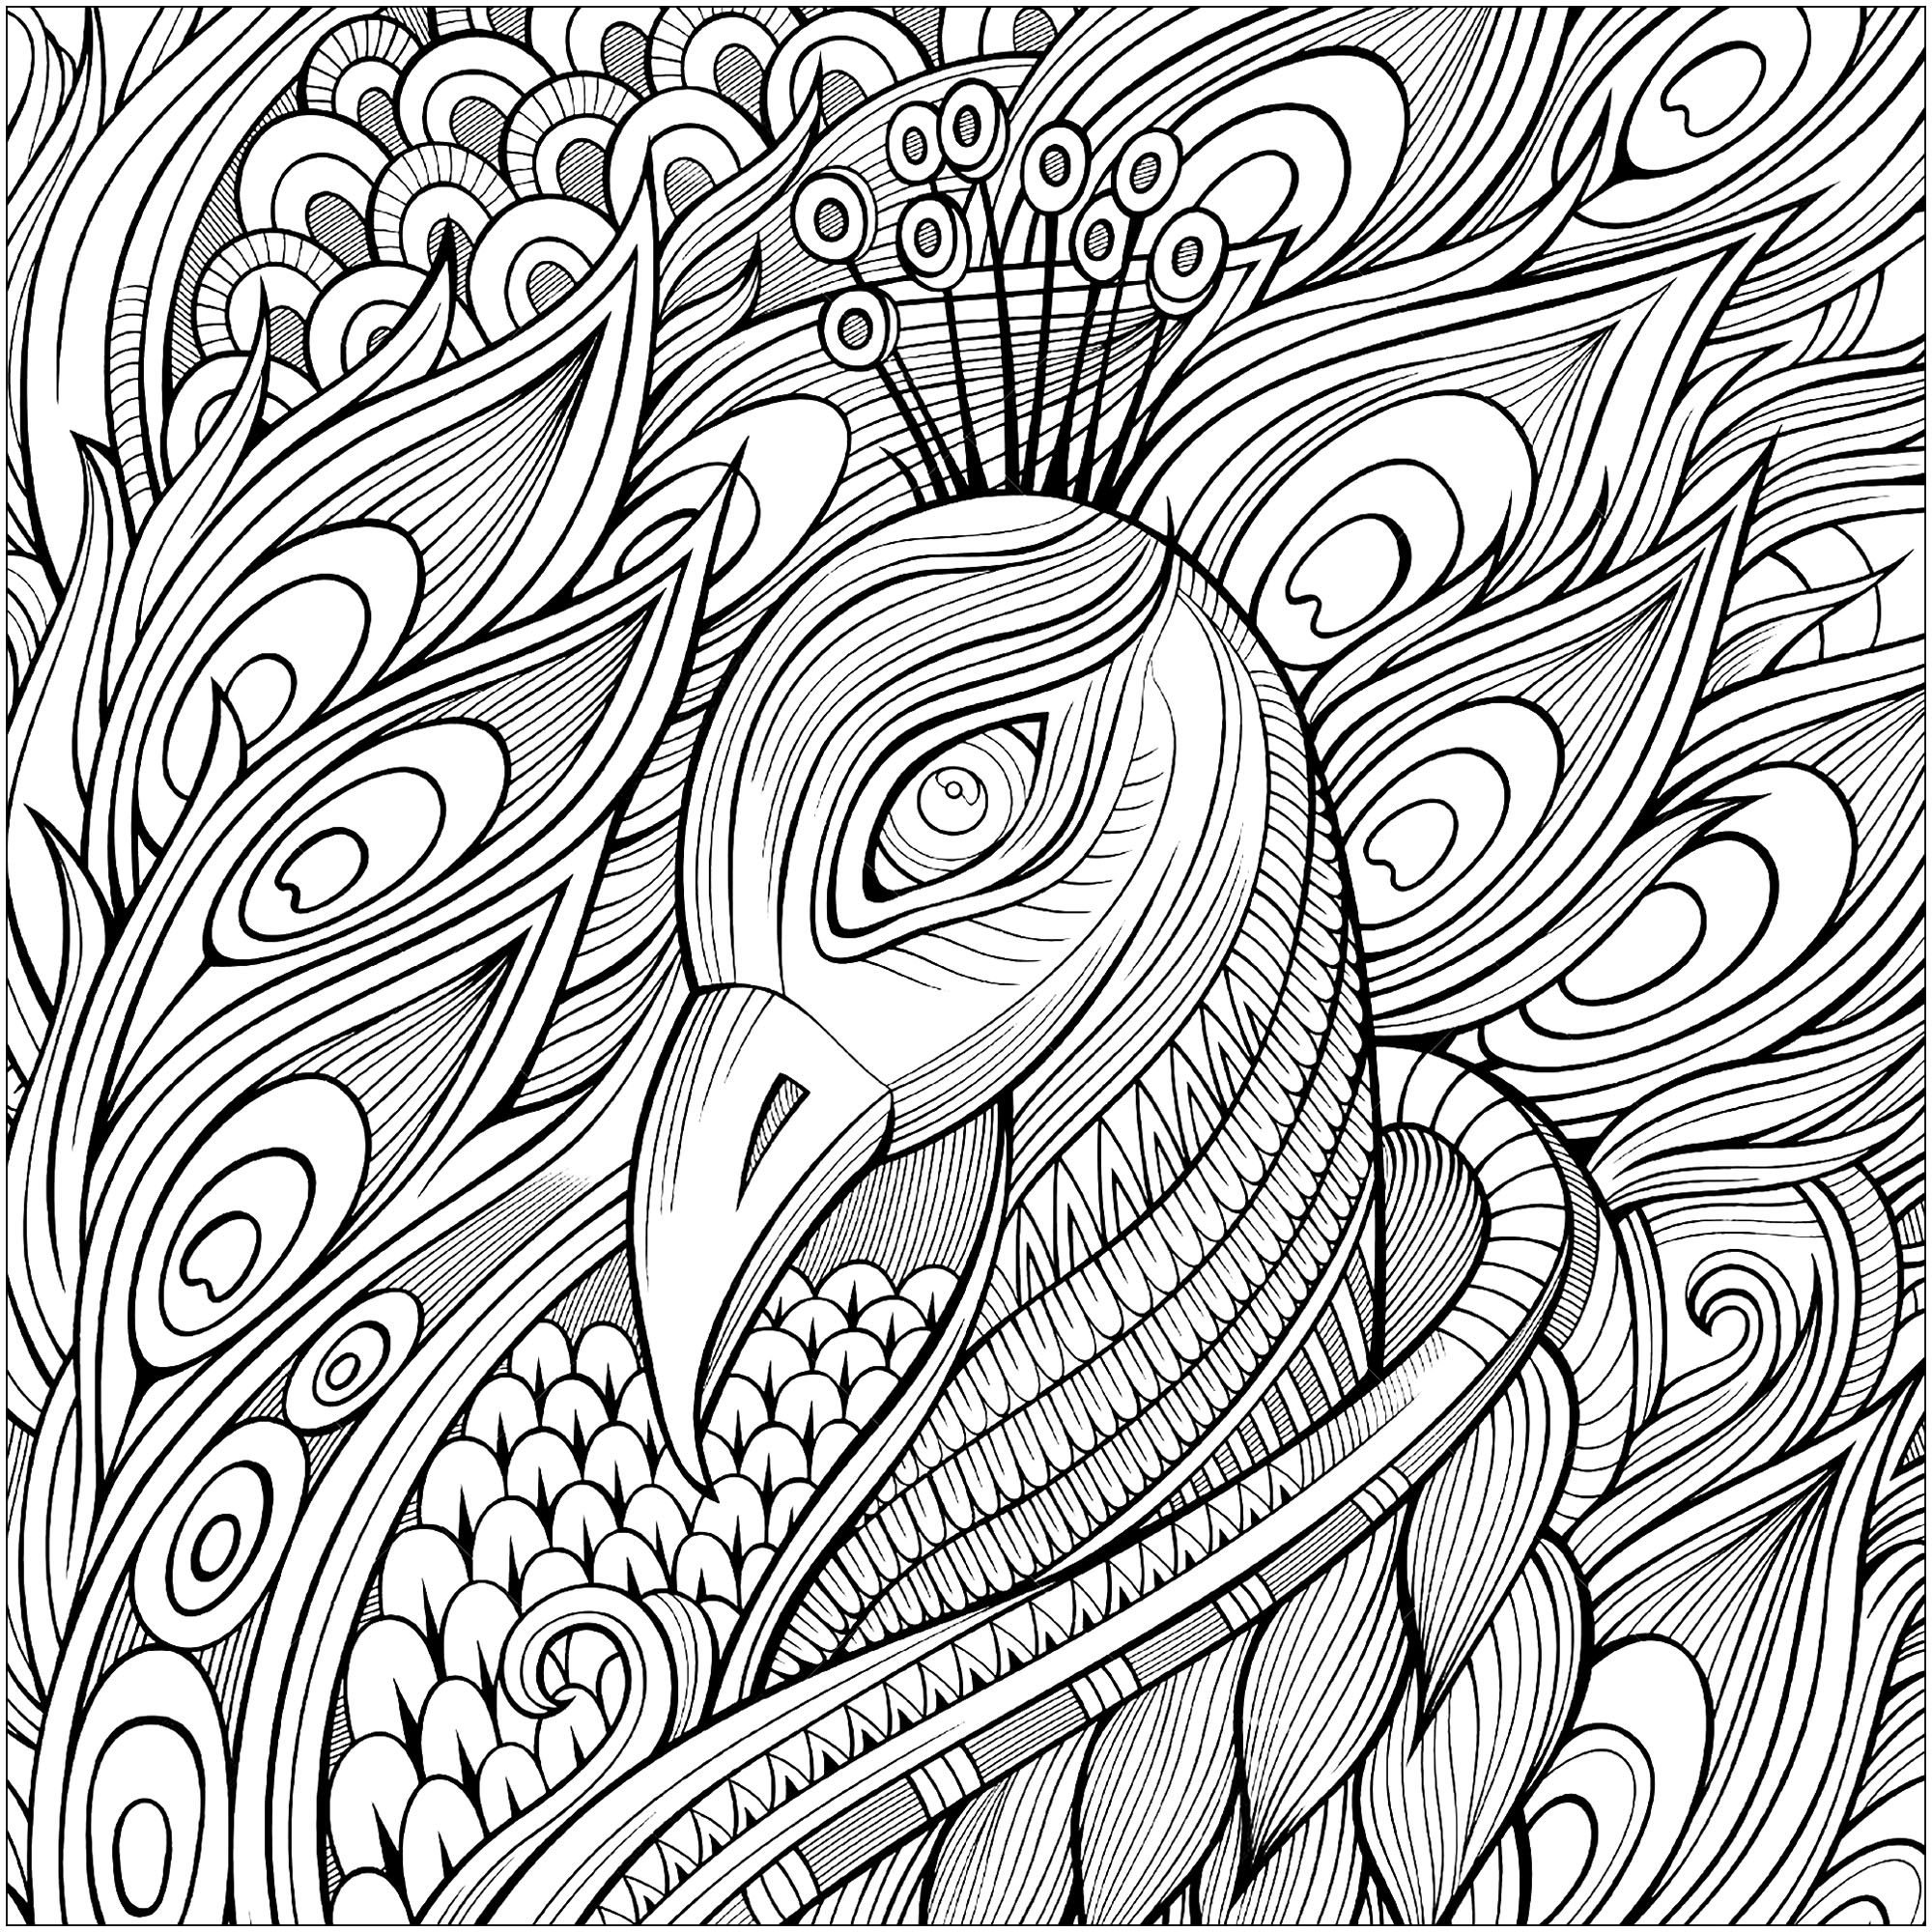 Coloring page representing the head of peacock and its magnificent feathers, Source : 123rf   Artist : Olga Kostenko